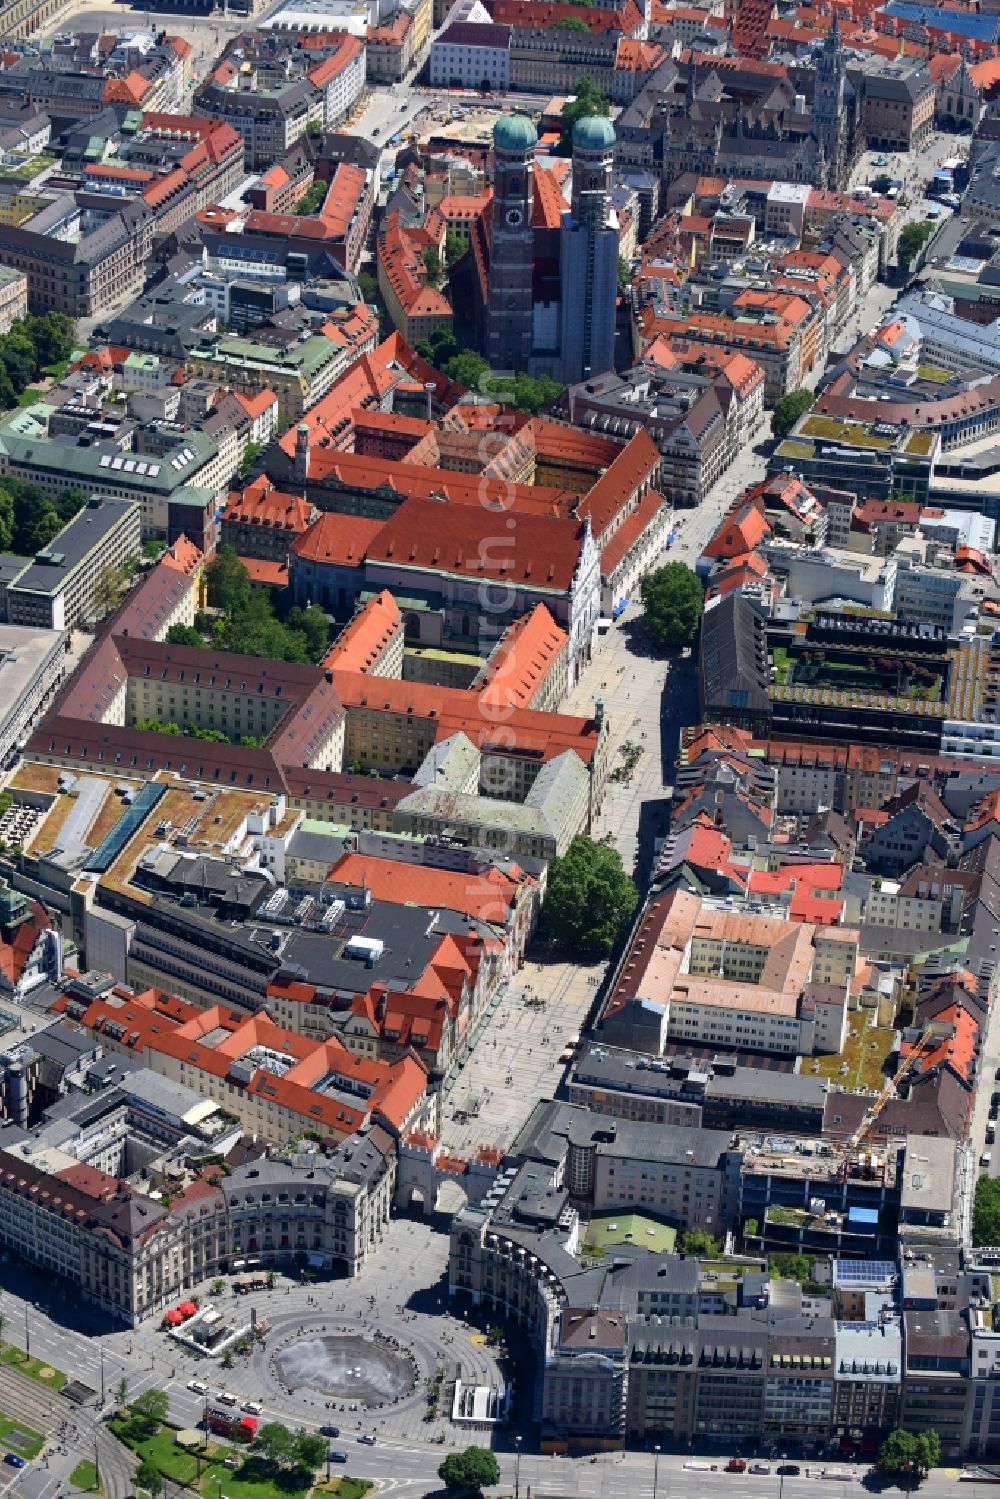 Aerial photograph München - The fountains and water games at the Munich Karlsplatz